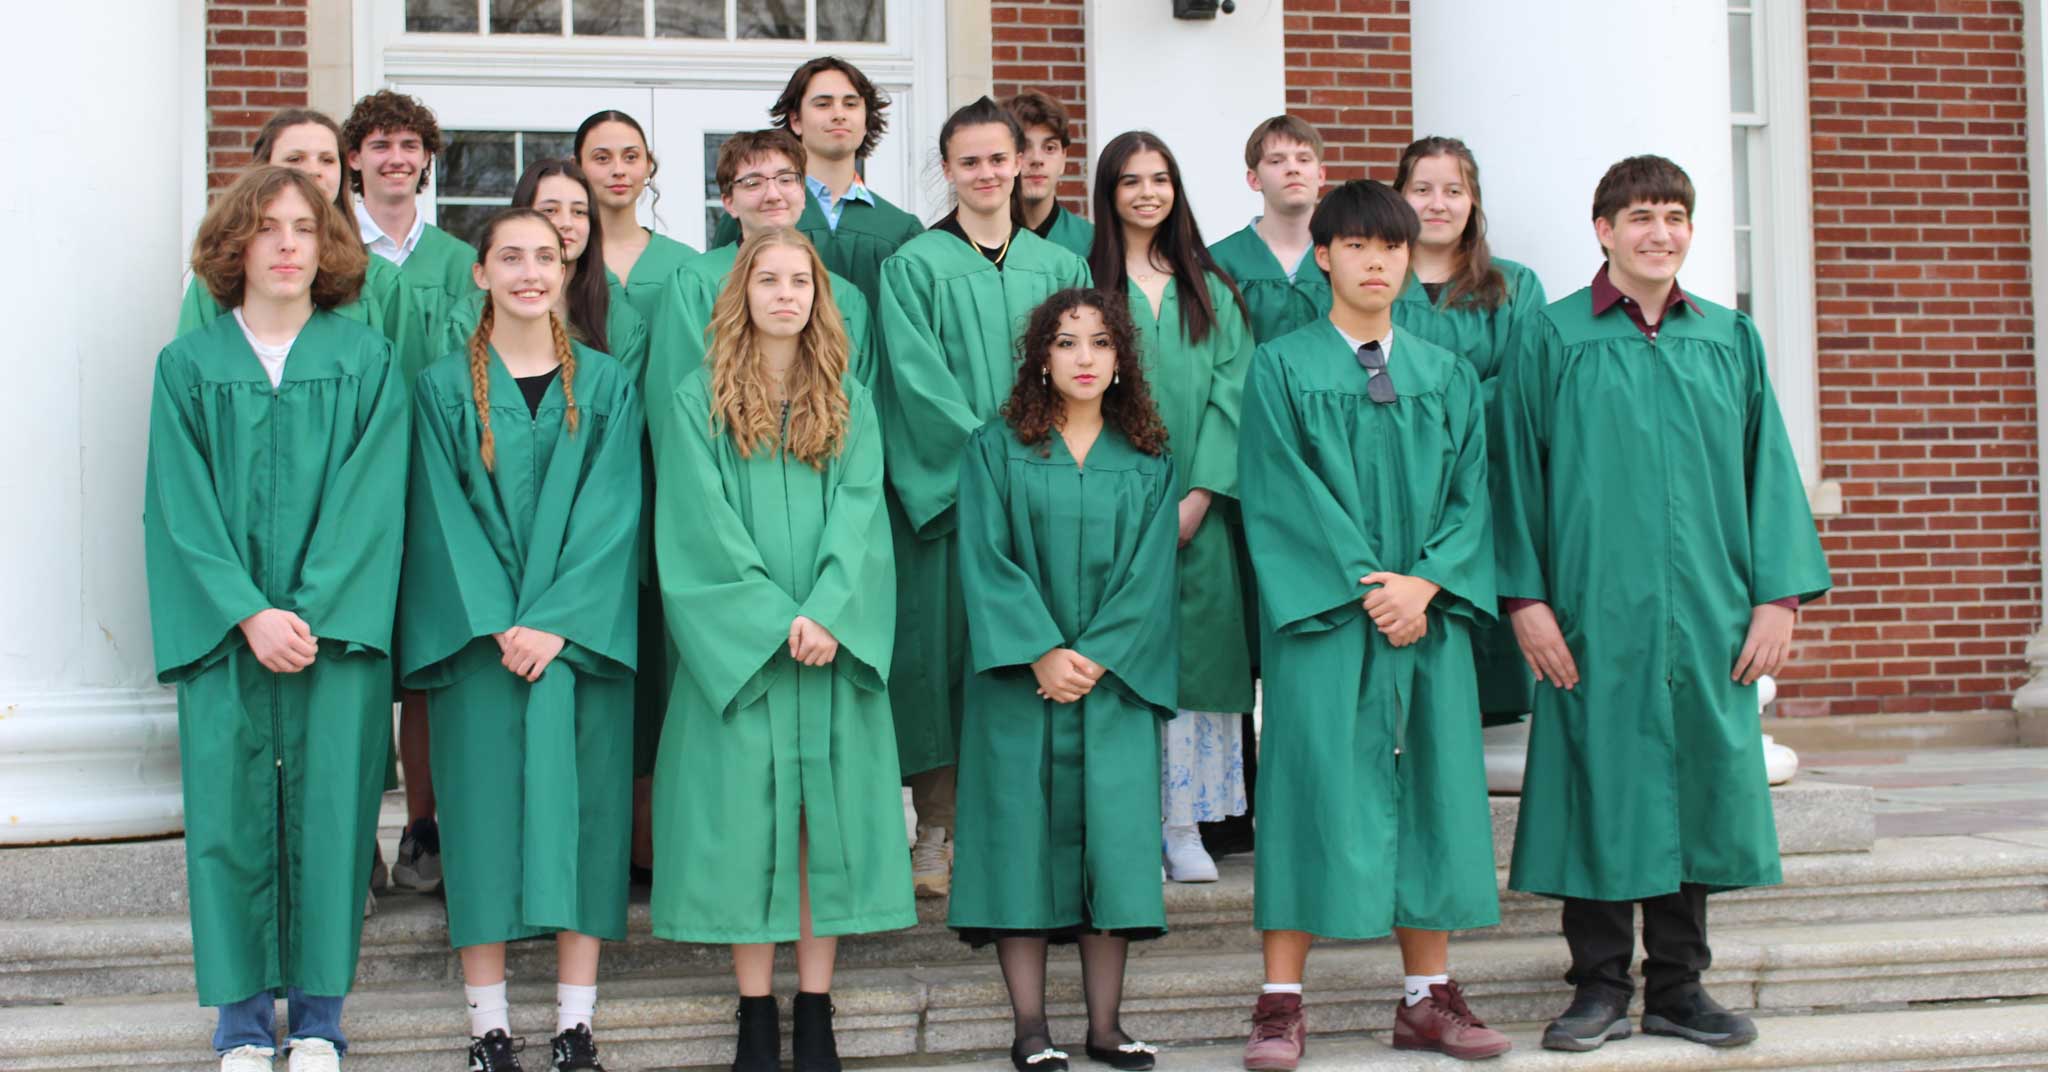 Members of the honor society stand on front steps of high school. They are wearing green robes.